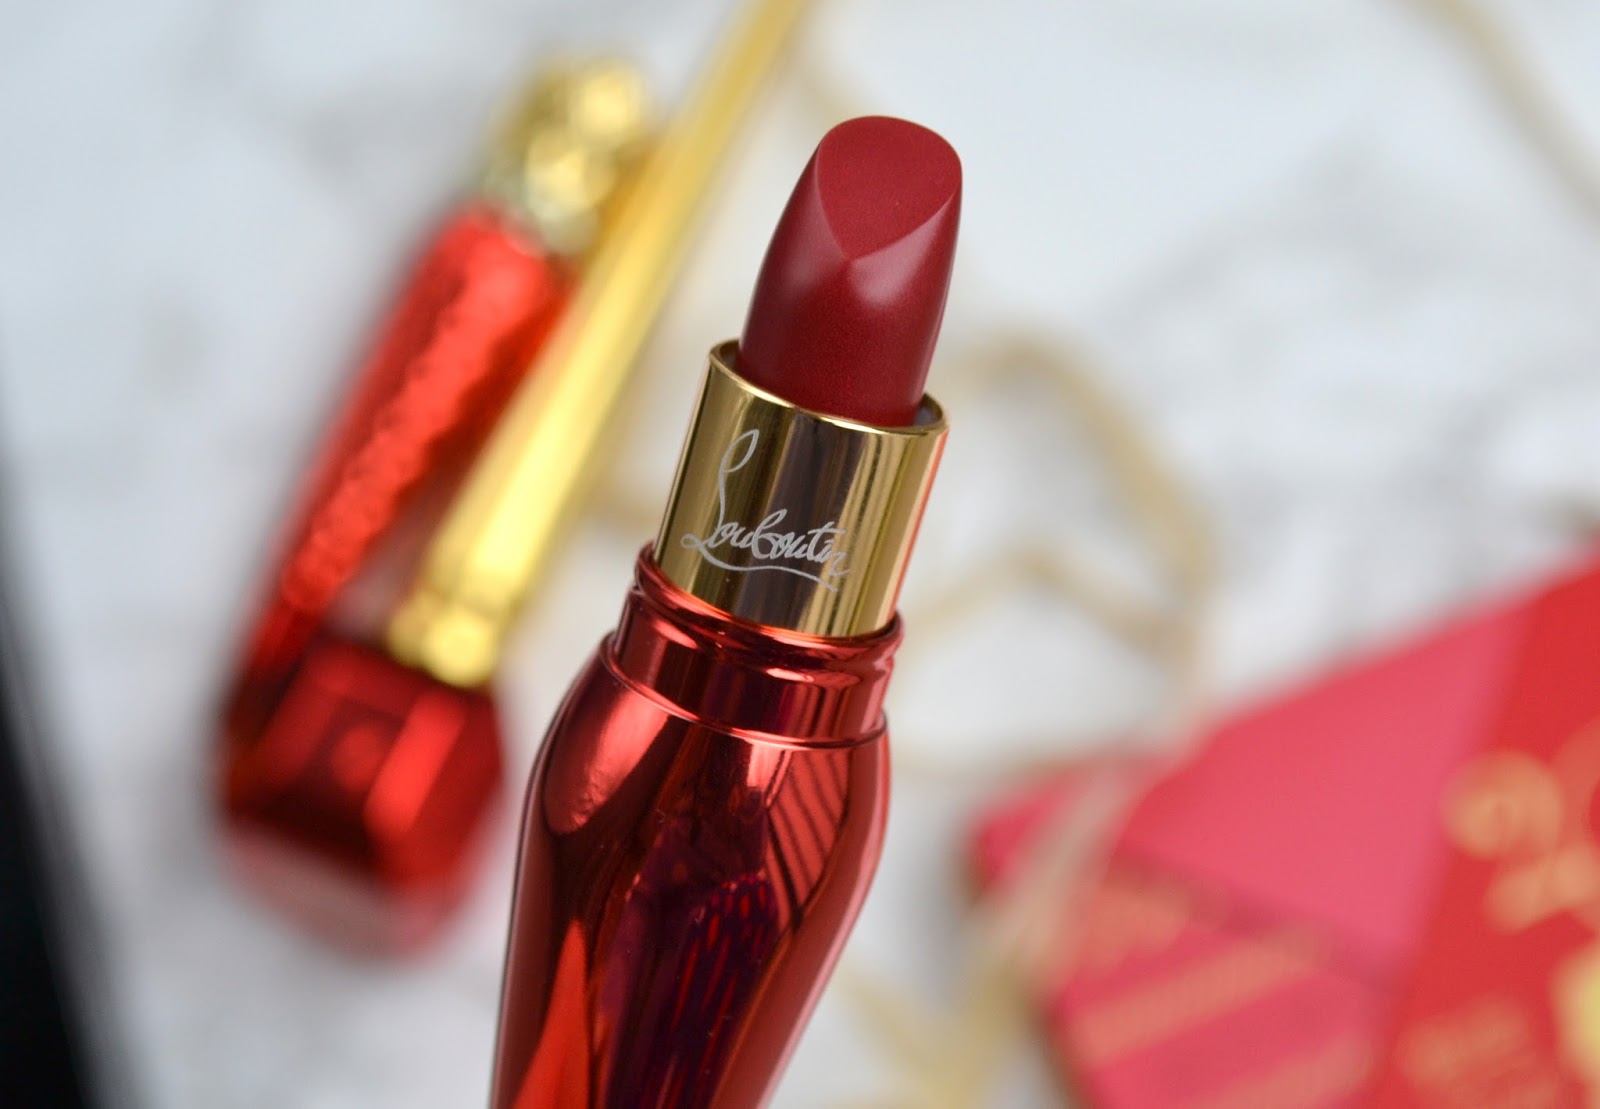 Christian Louboutin Metalinudes Review and Swatches - The Beauty Look Book